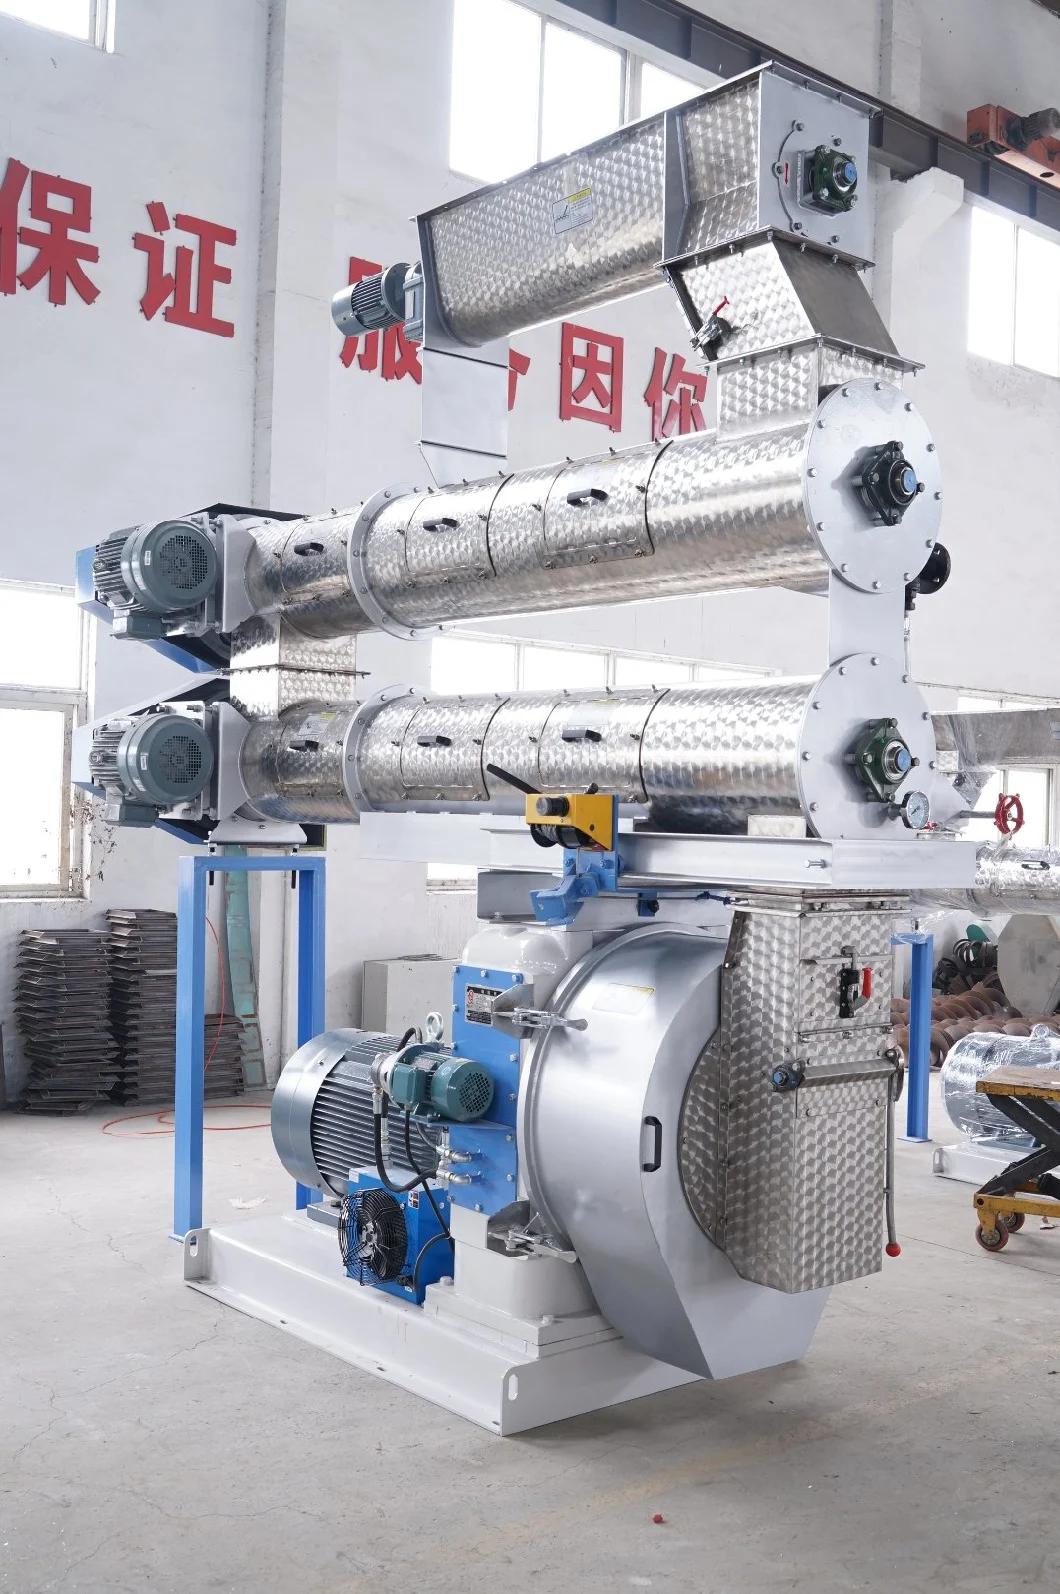 China Manufacture Cattle Chicken Livestock Fish Poultry Feed Making Machine as One of Main Feed Machines, with CE Certificated Pellet Machine.